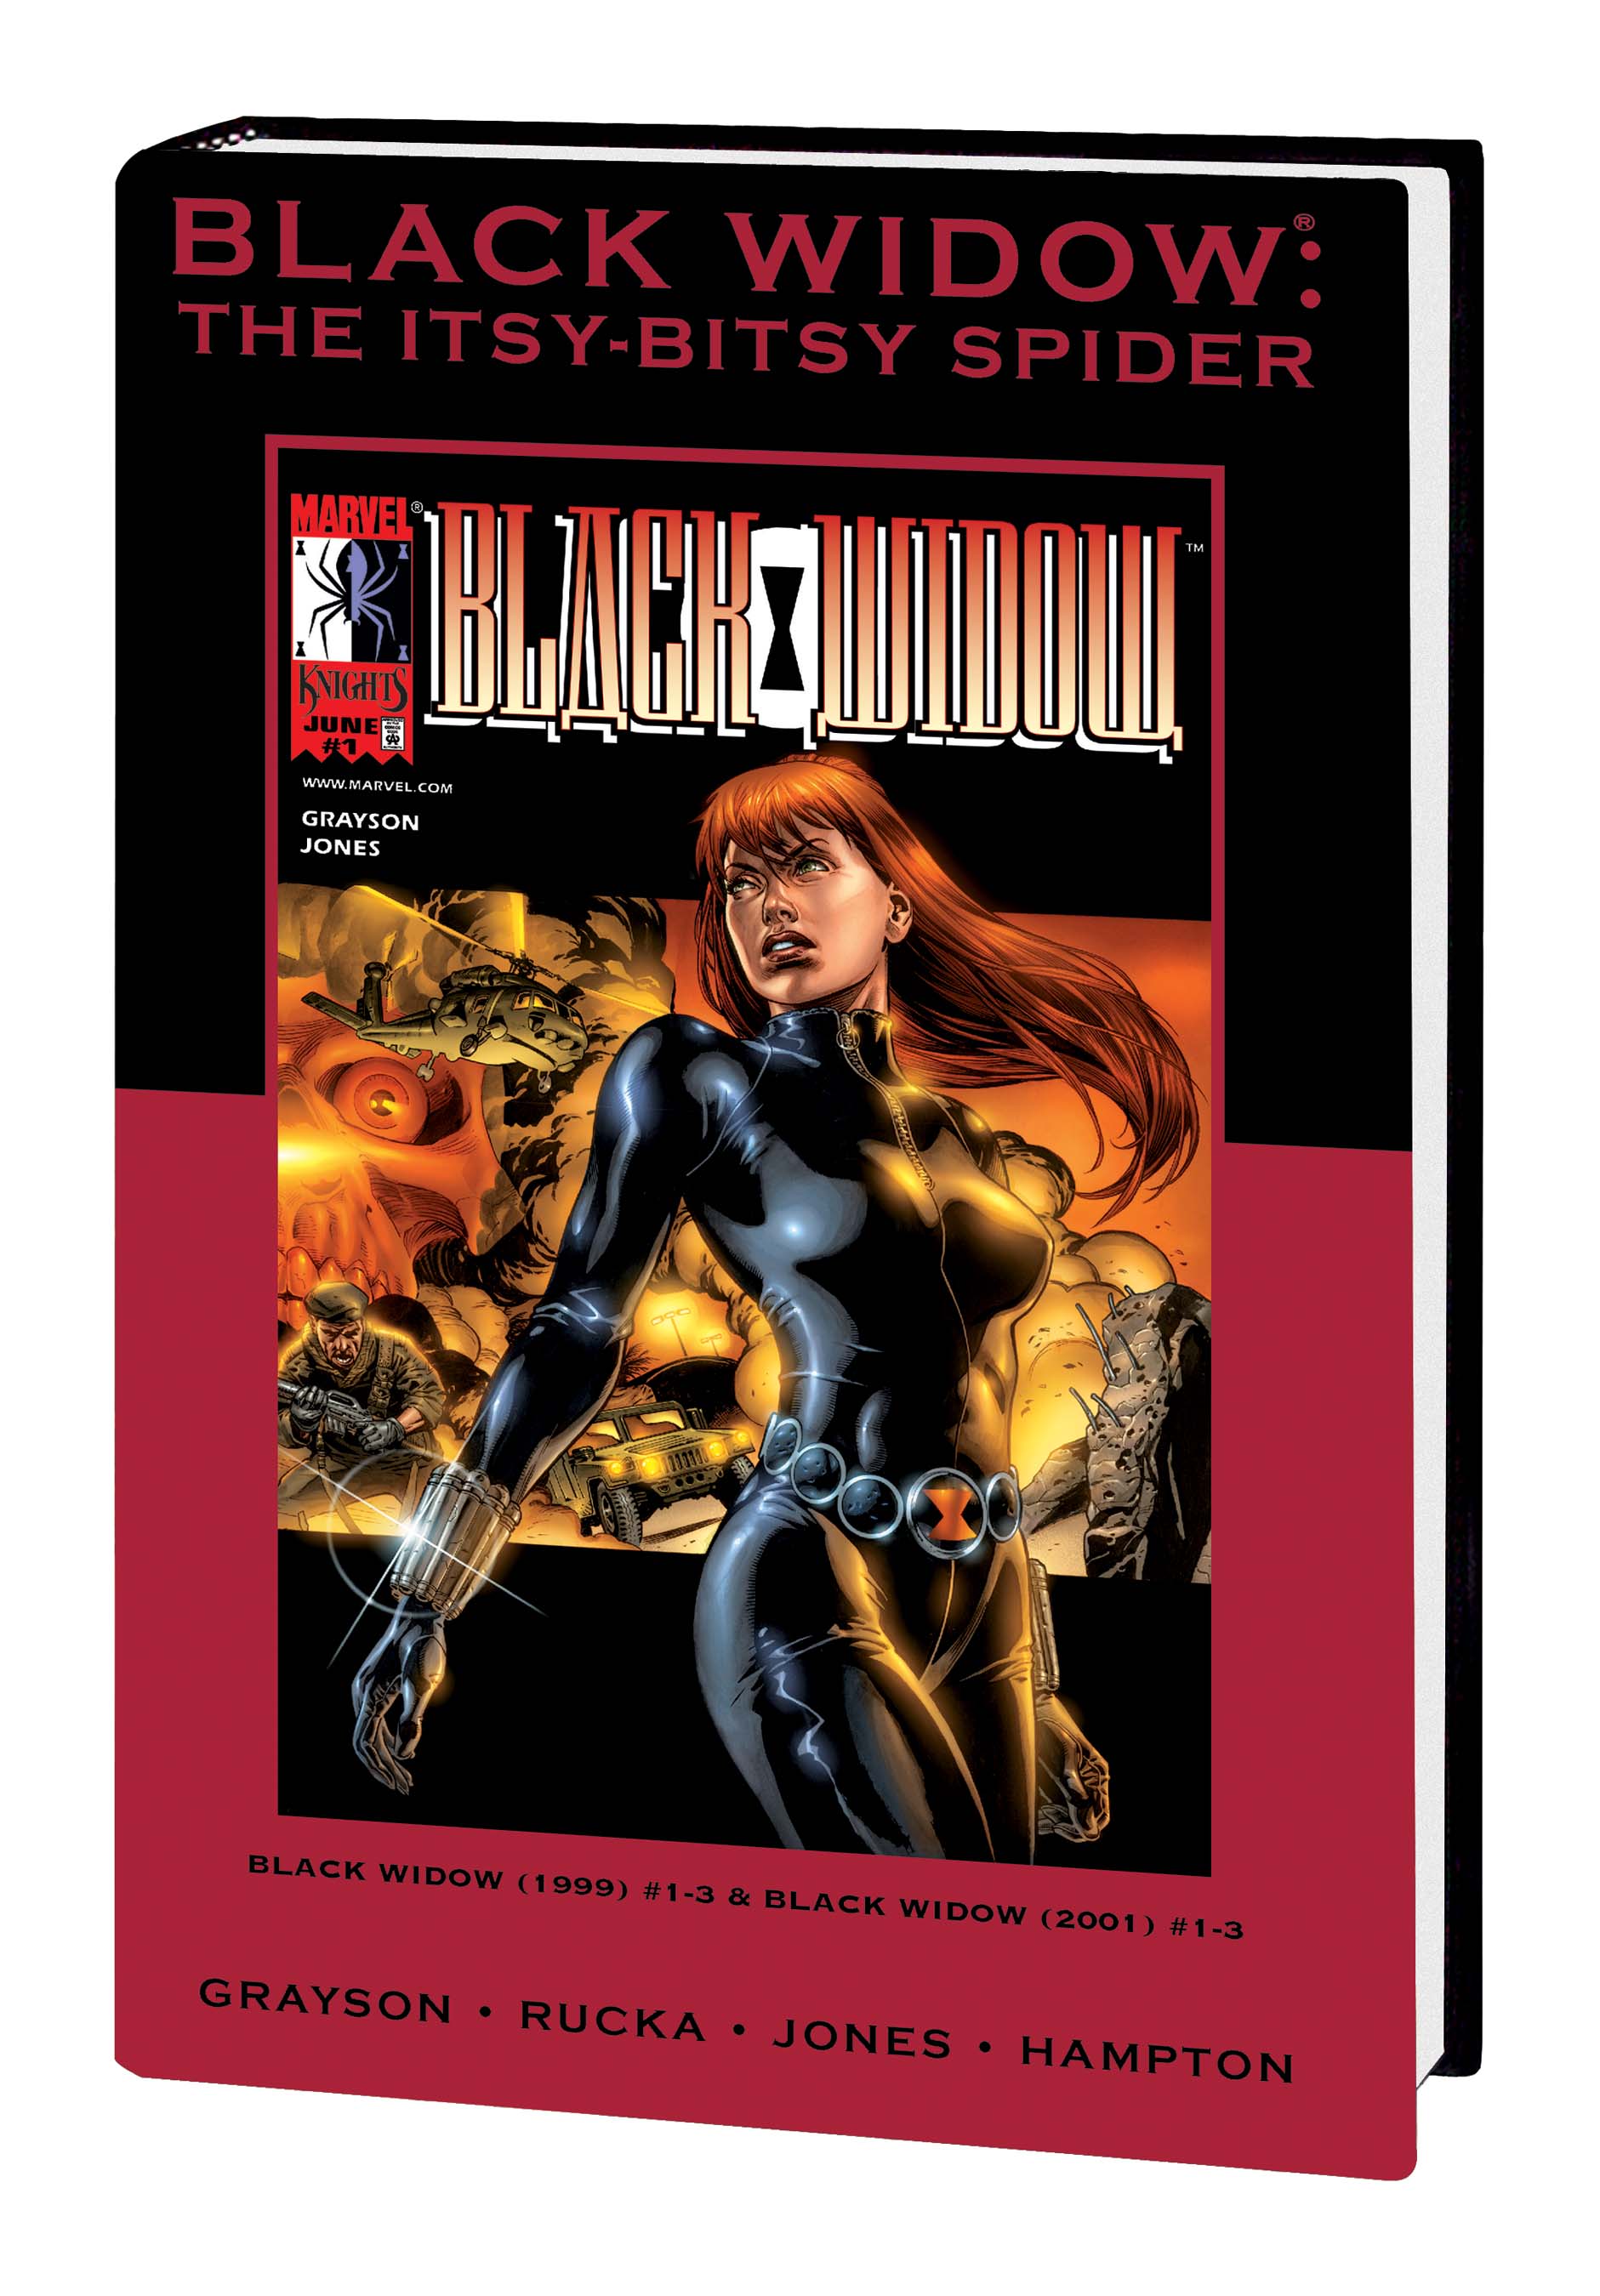 Black Widow: The Itsy-Bitsy Spider DM Variant (Hardcover)